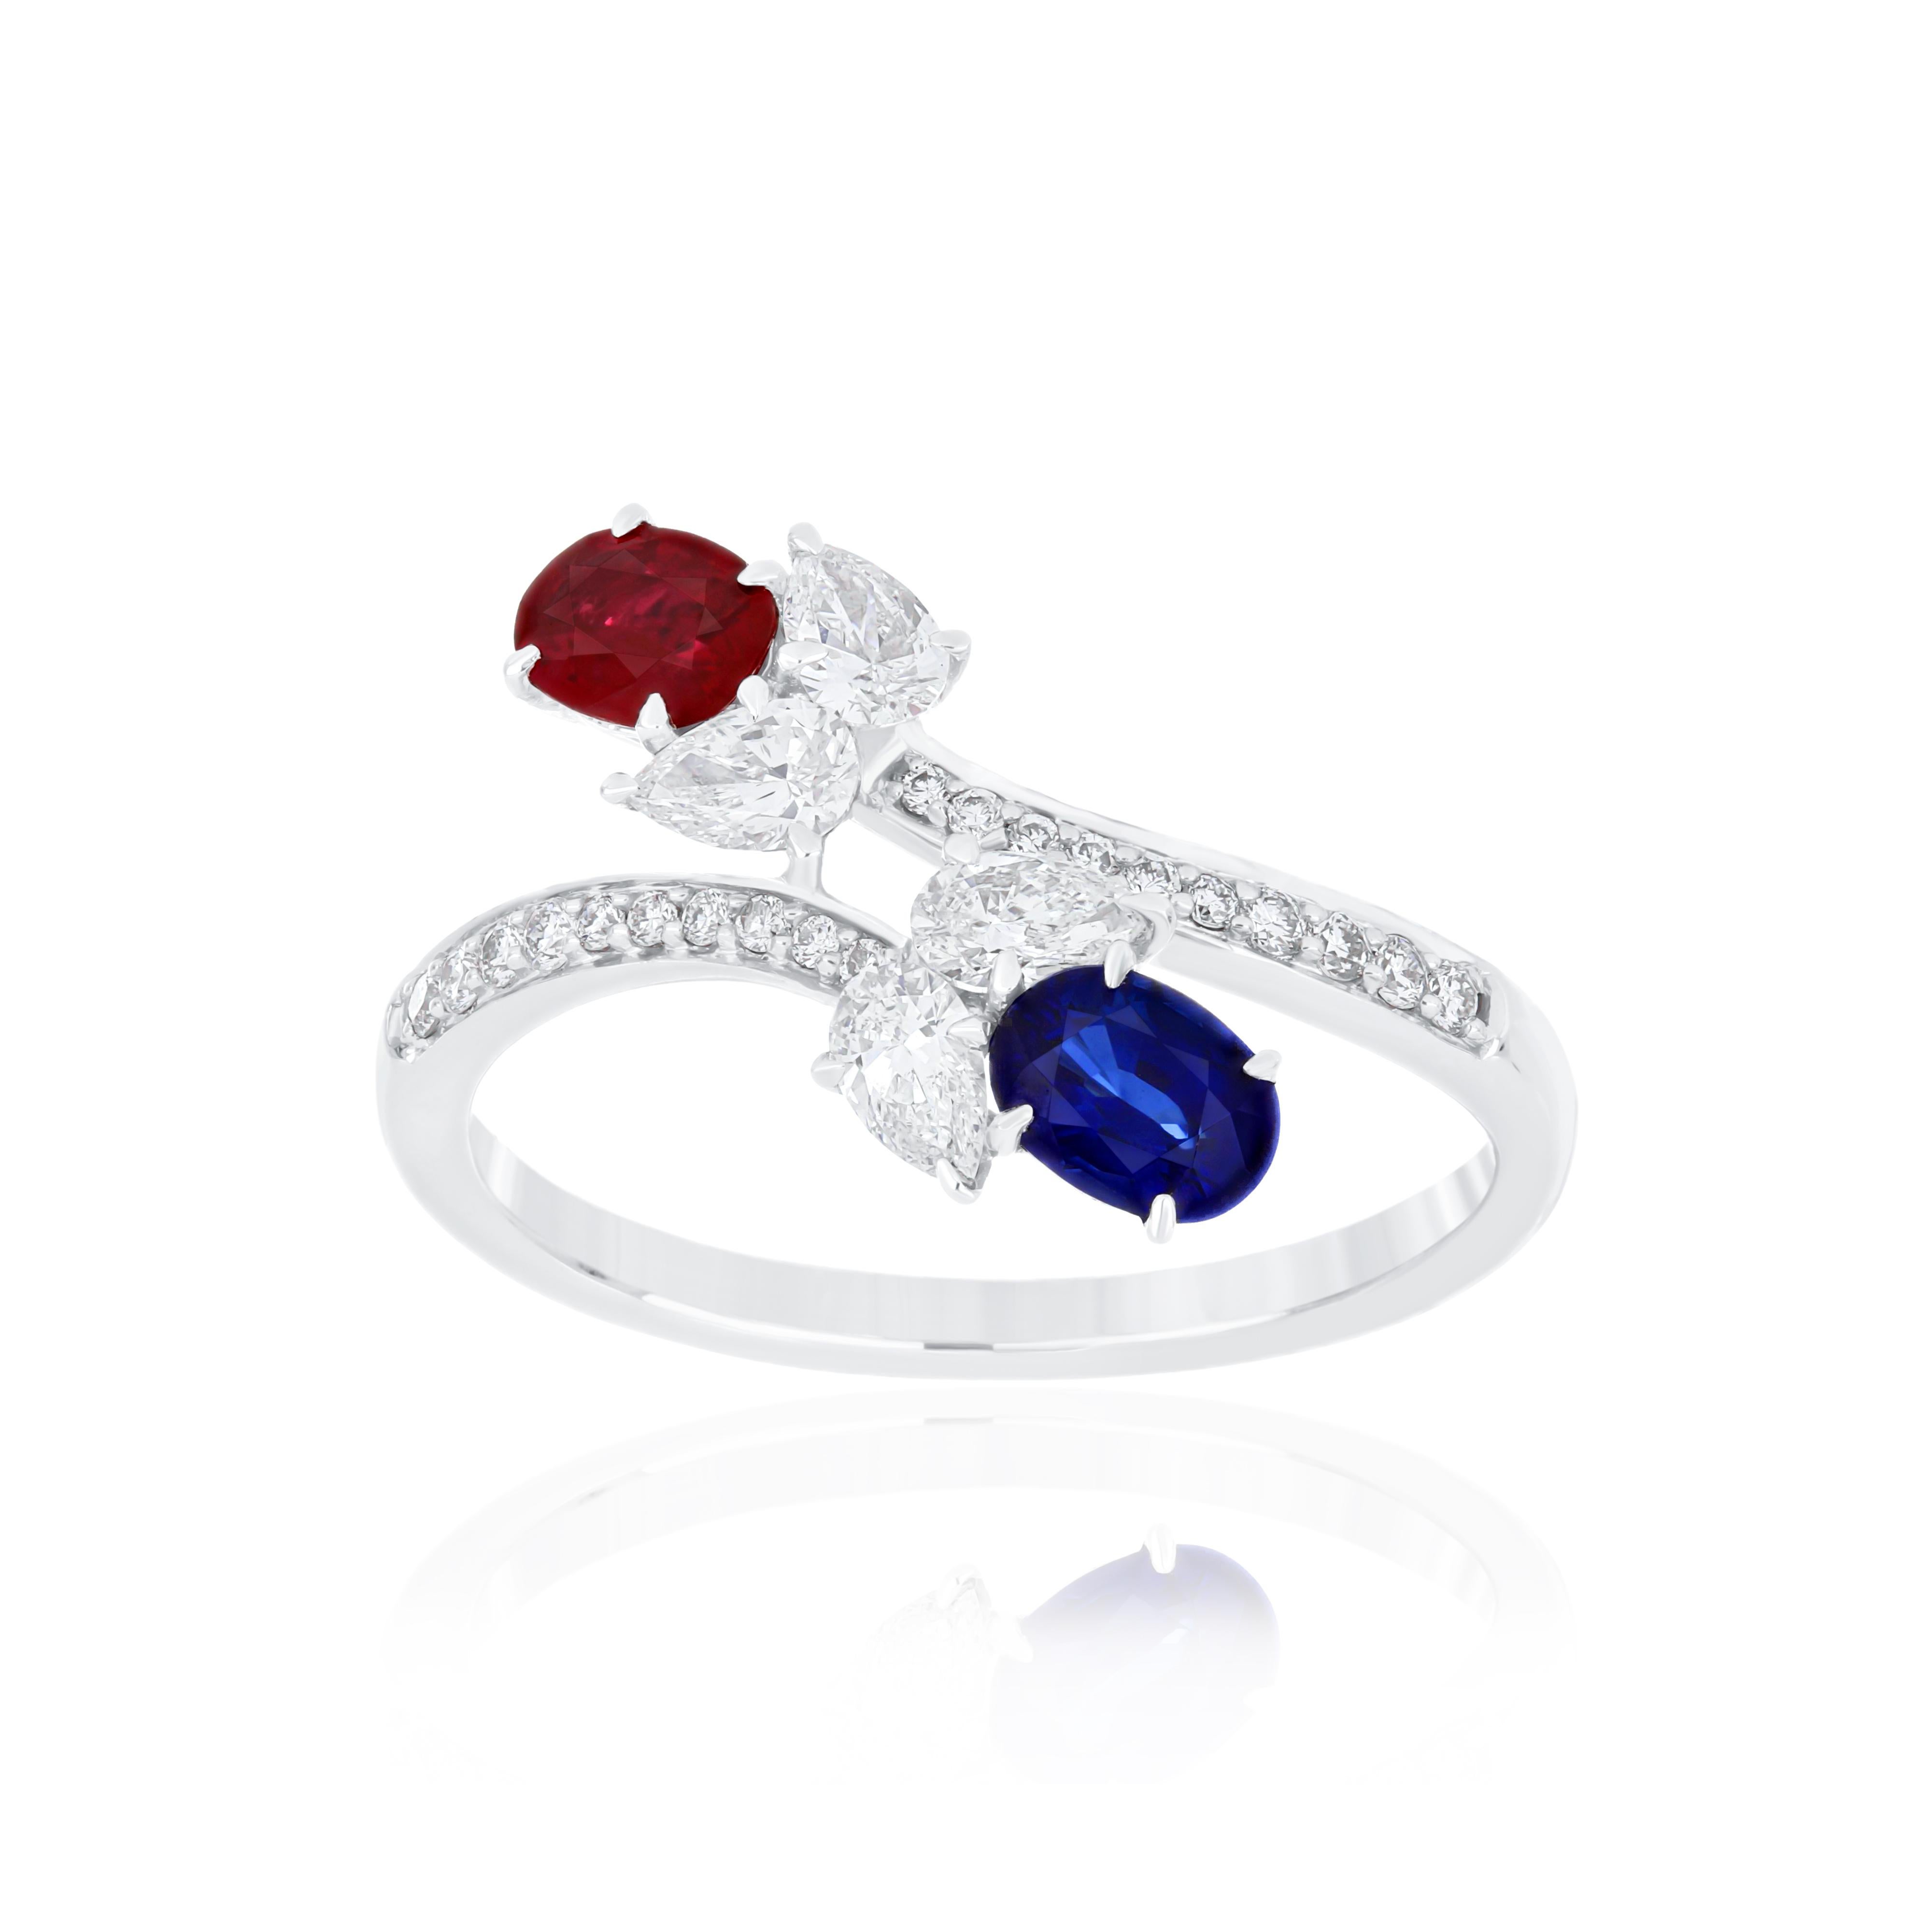 Oval Cut Ruby Mozambique, Blue Sapphire and Diamond Ring 18K White Gold handcraft Jewelry For Sale